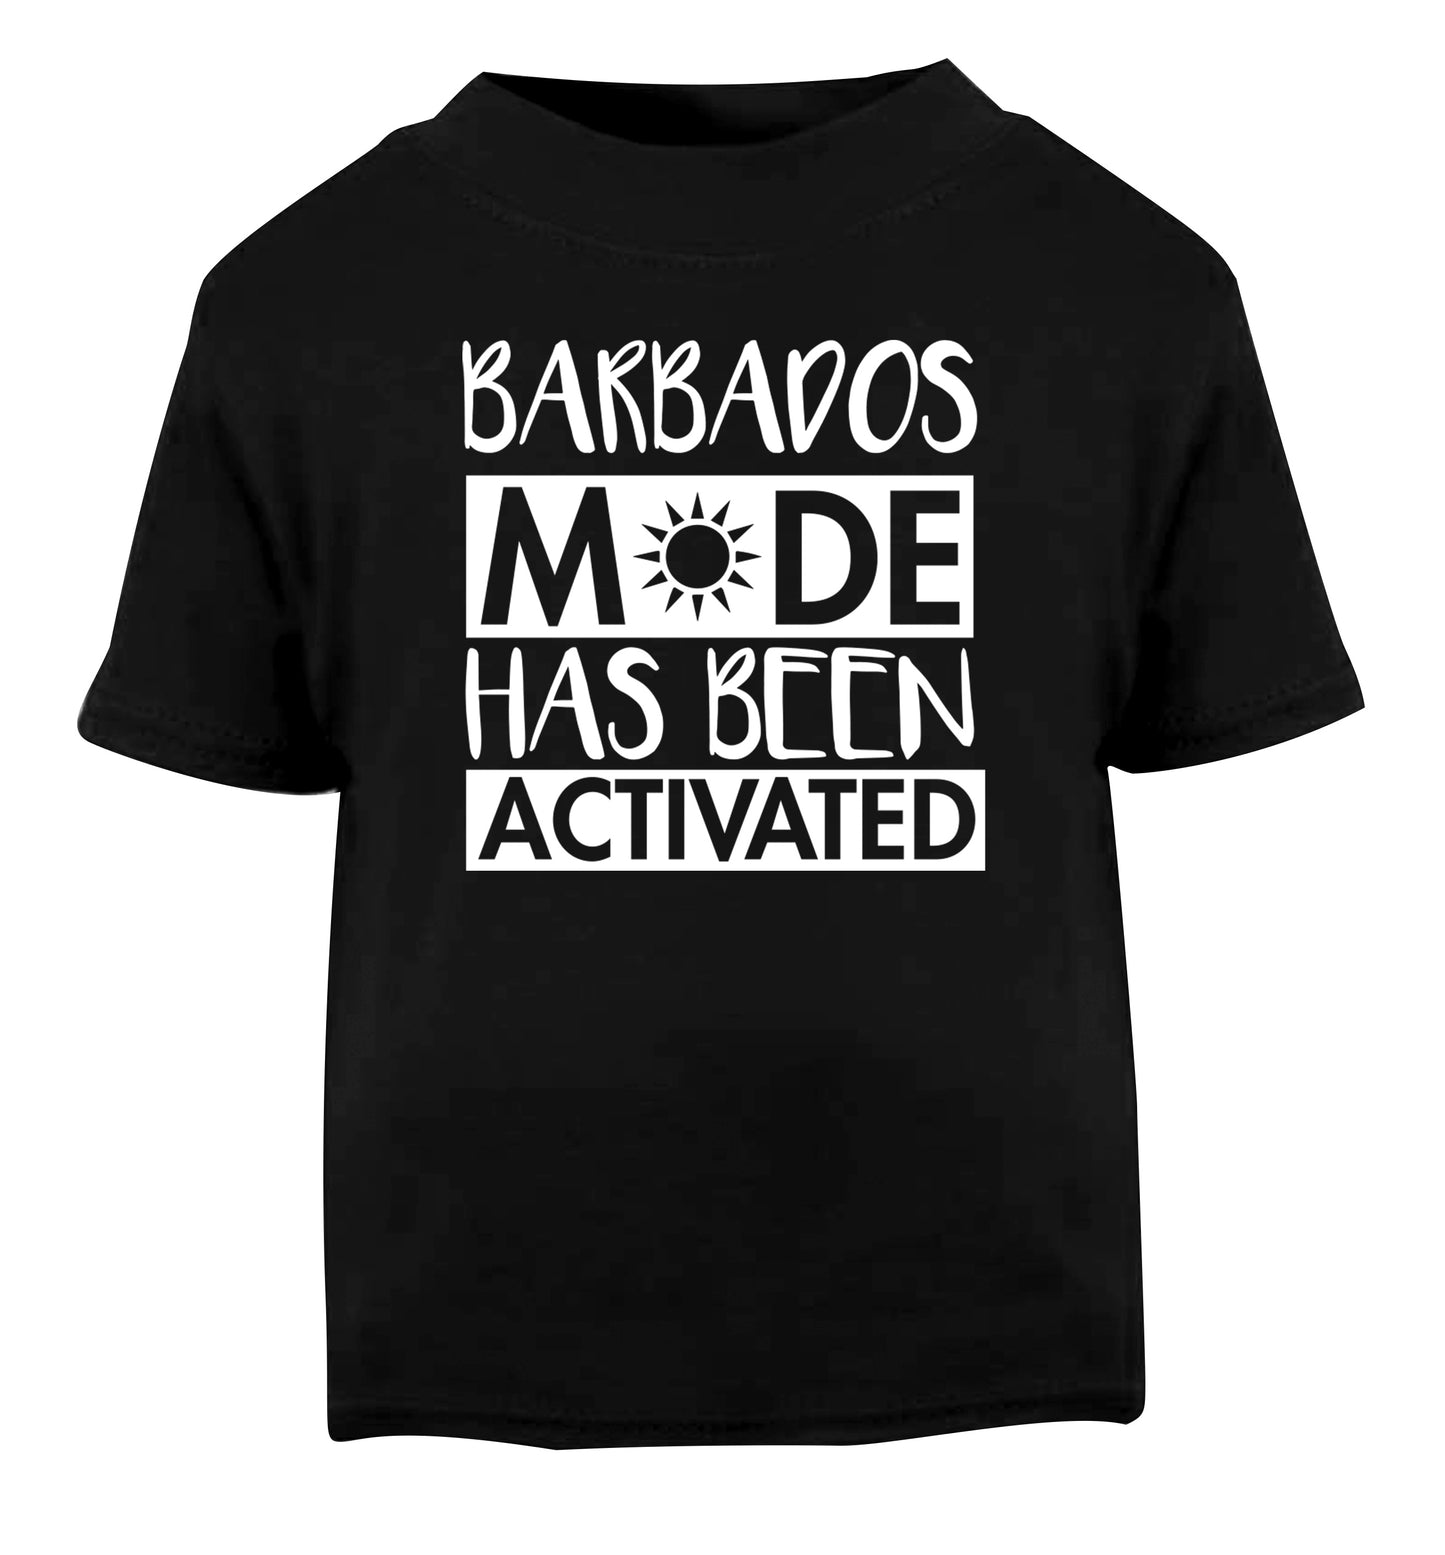 Barbados mode has been activated Black Baby Toddler Tshirt 2 years